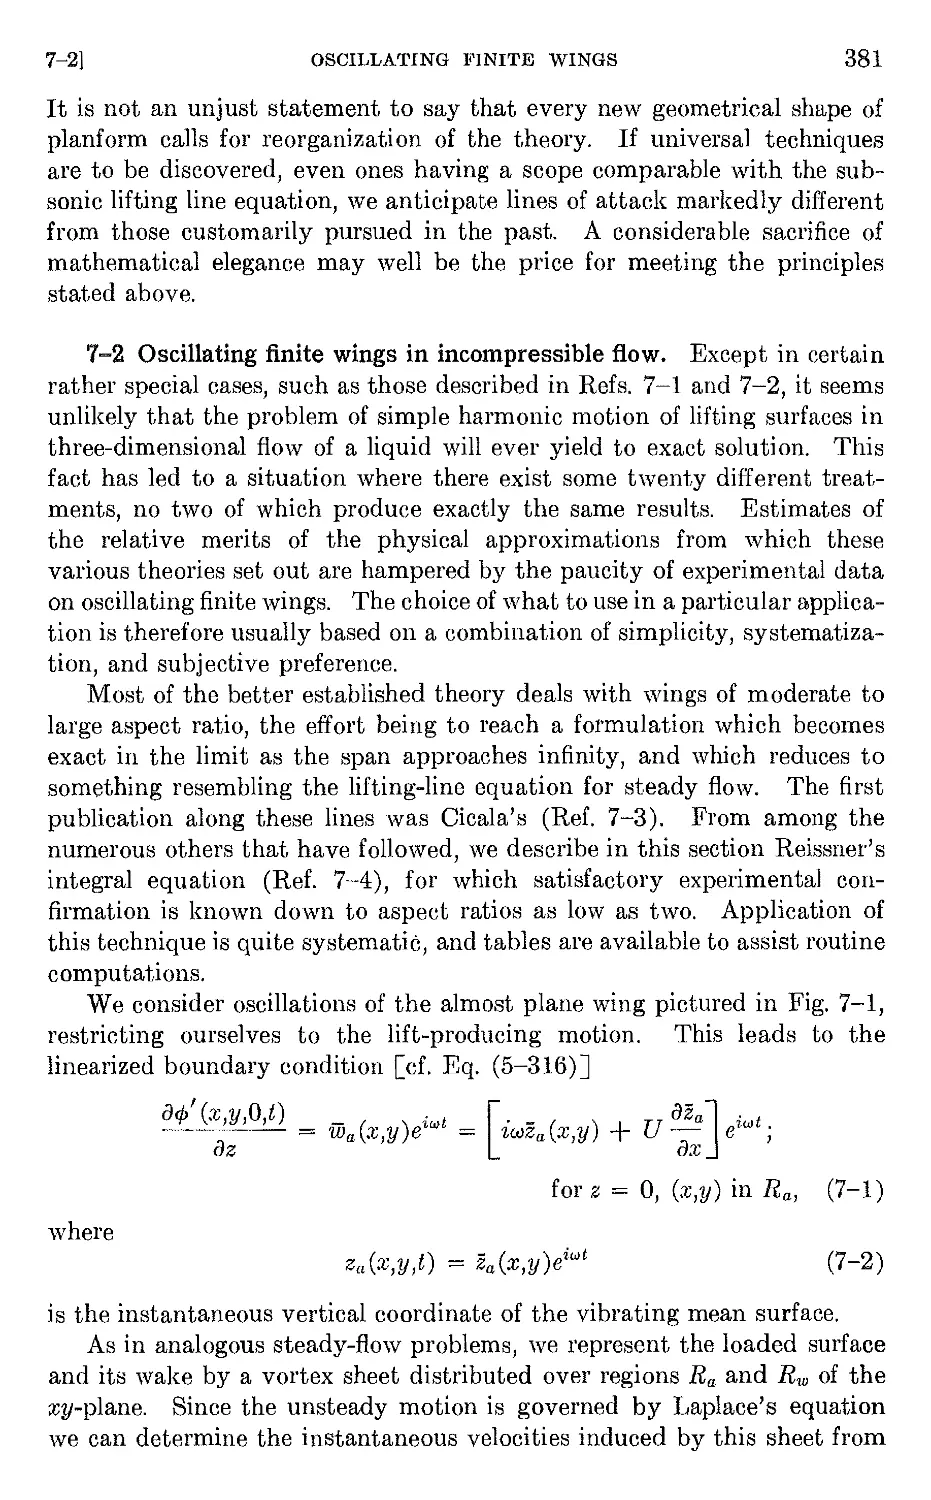 7.2 Oscillating finite wings in incompressible flow